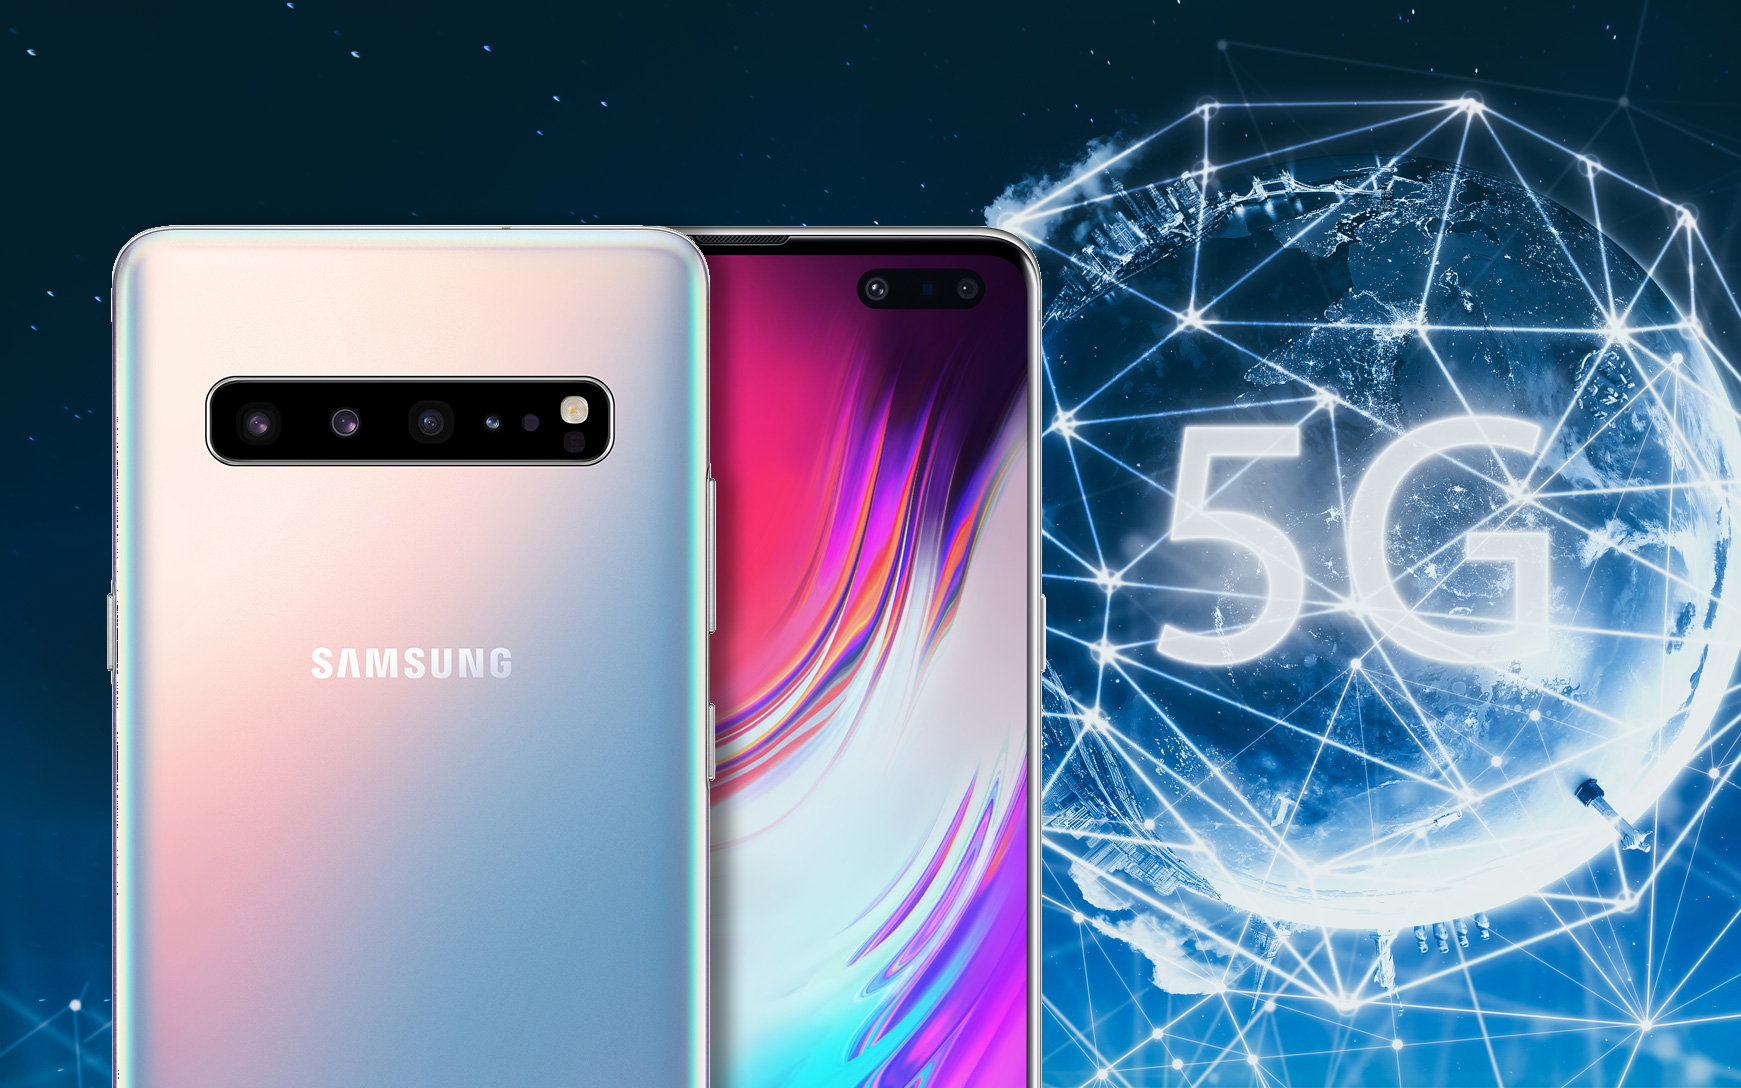 Samsung Galaxy S10 Full Phone Specifications